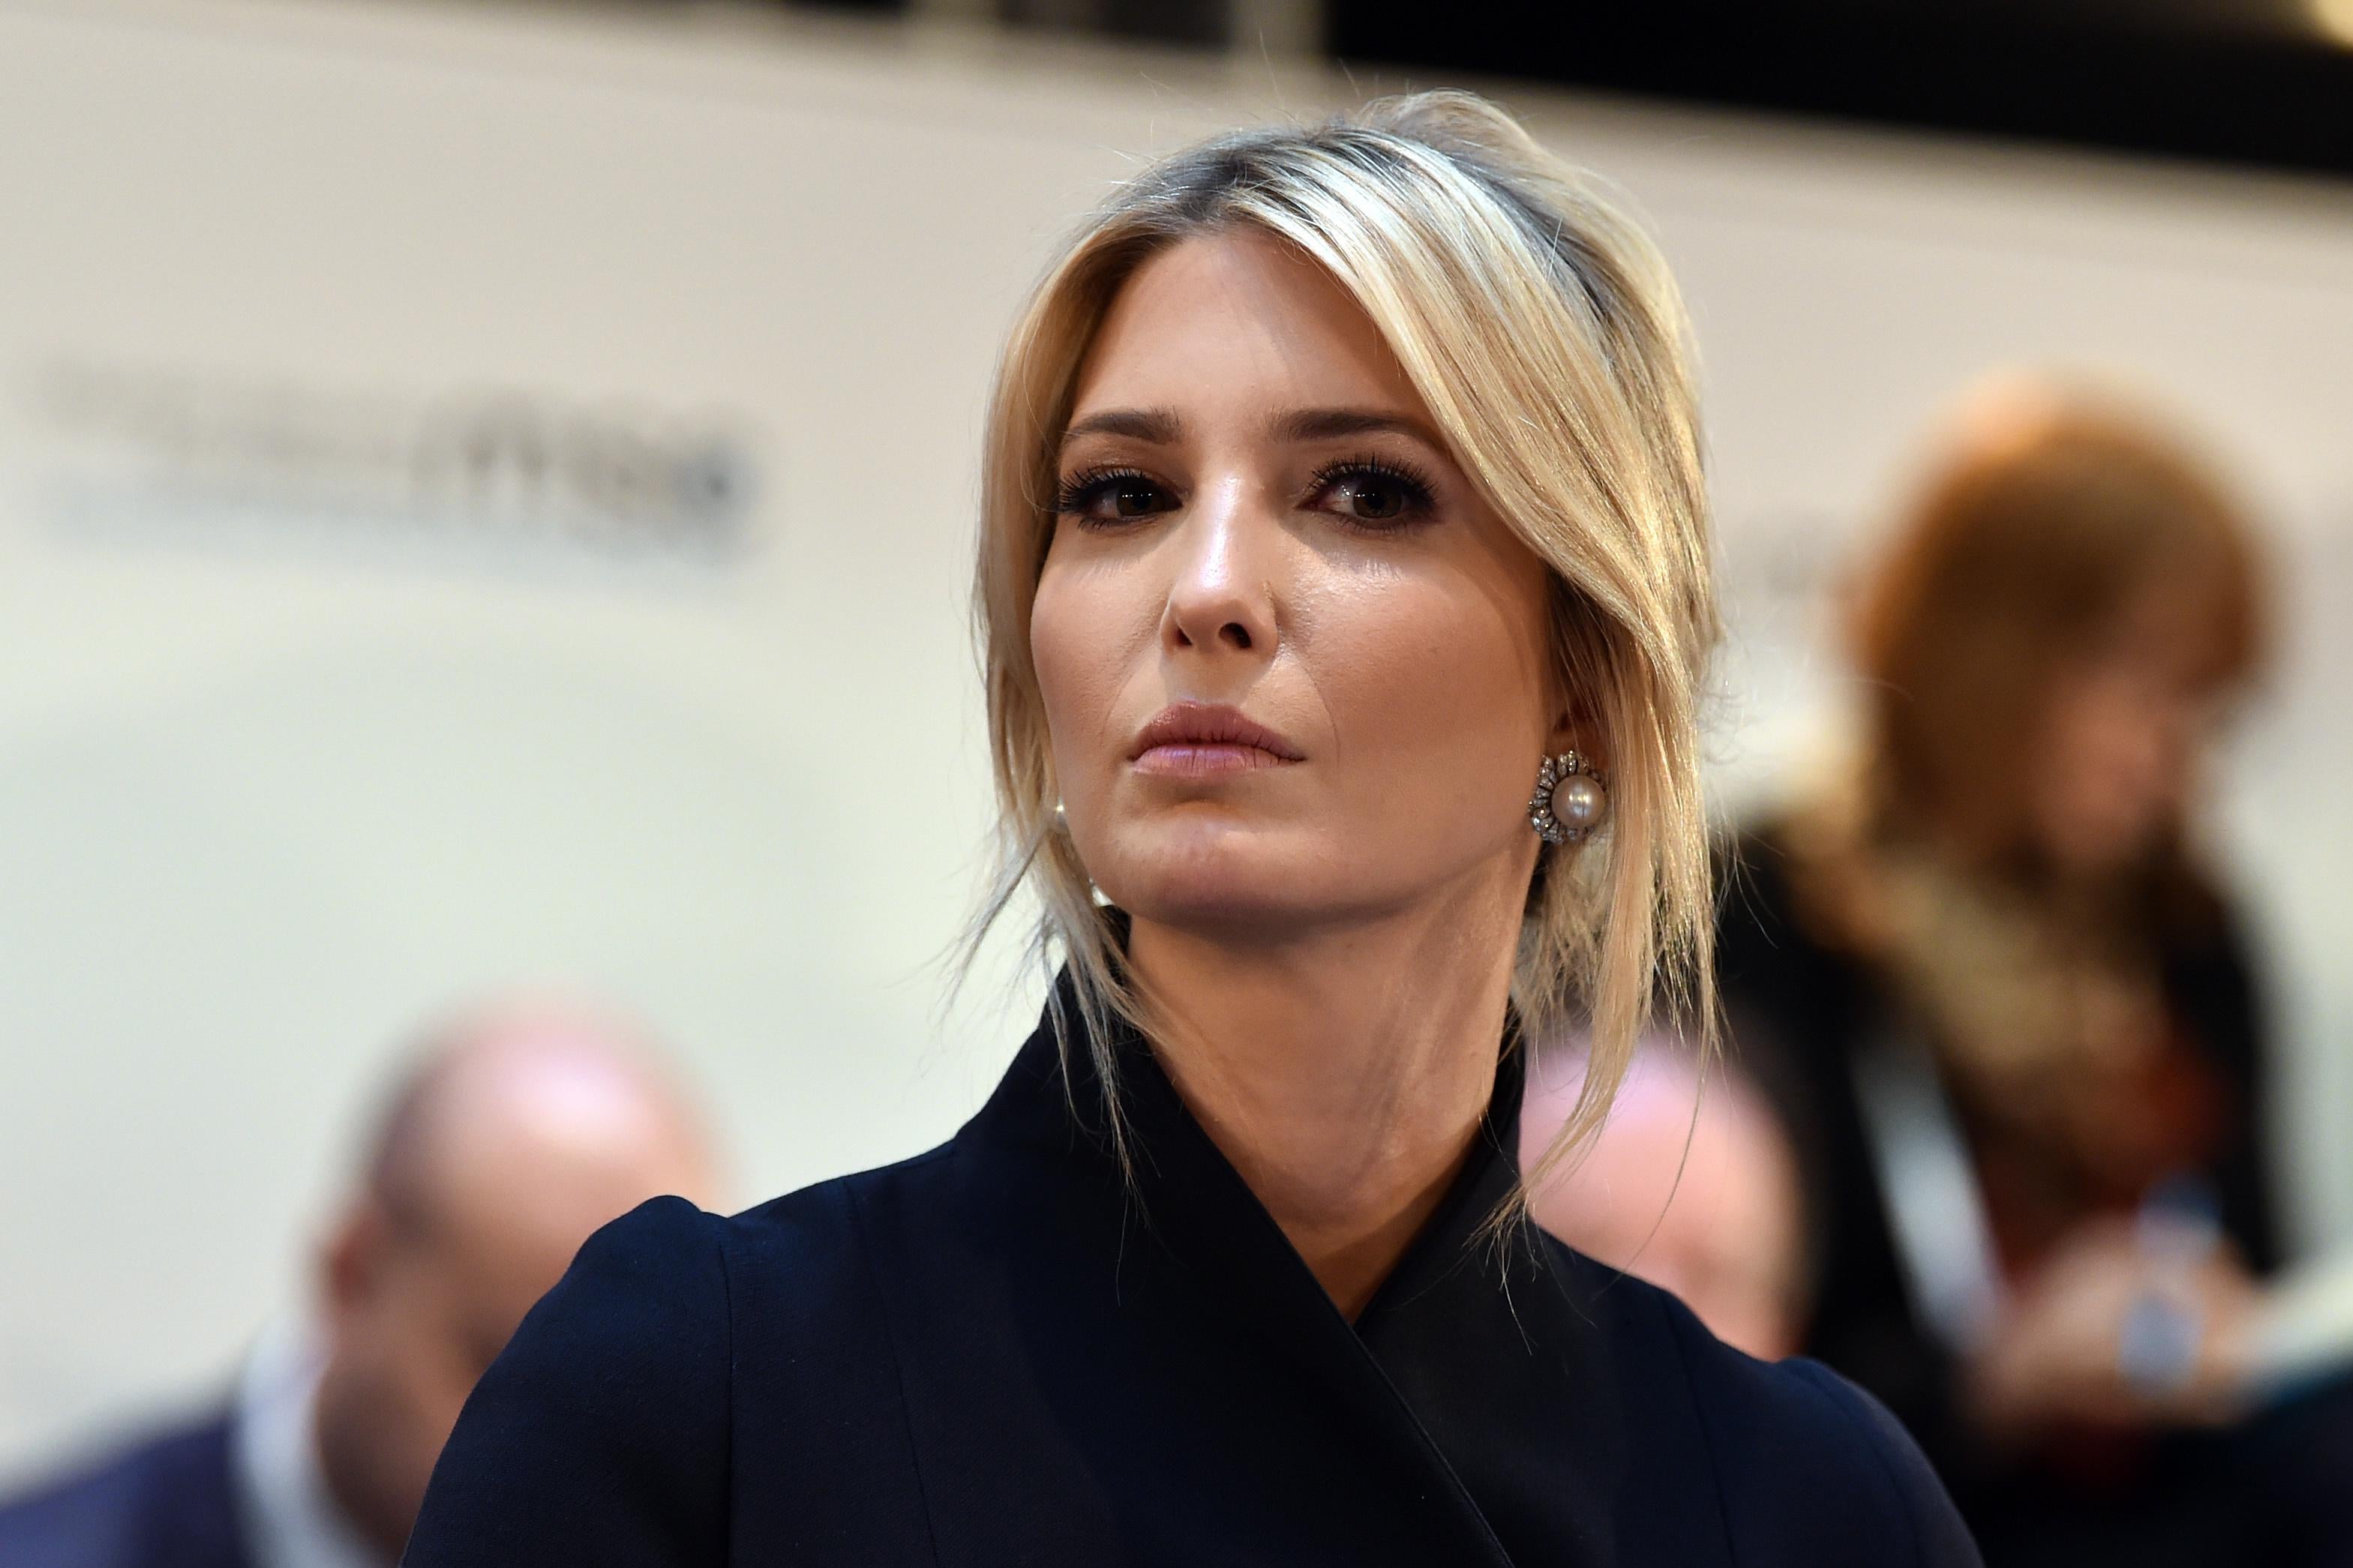 Ivanka Trump attends a panel discussion during the 55th Munich Security Conference in Munich, southern Germany, on February 16, 2019. 